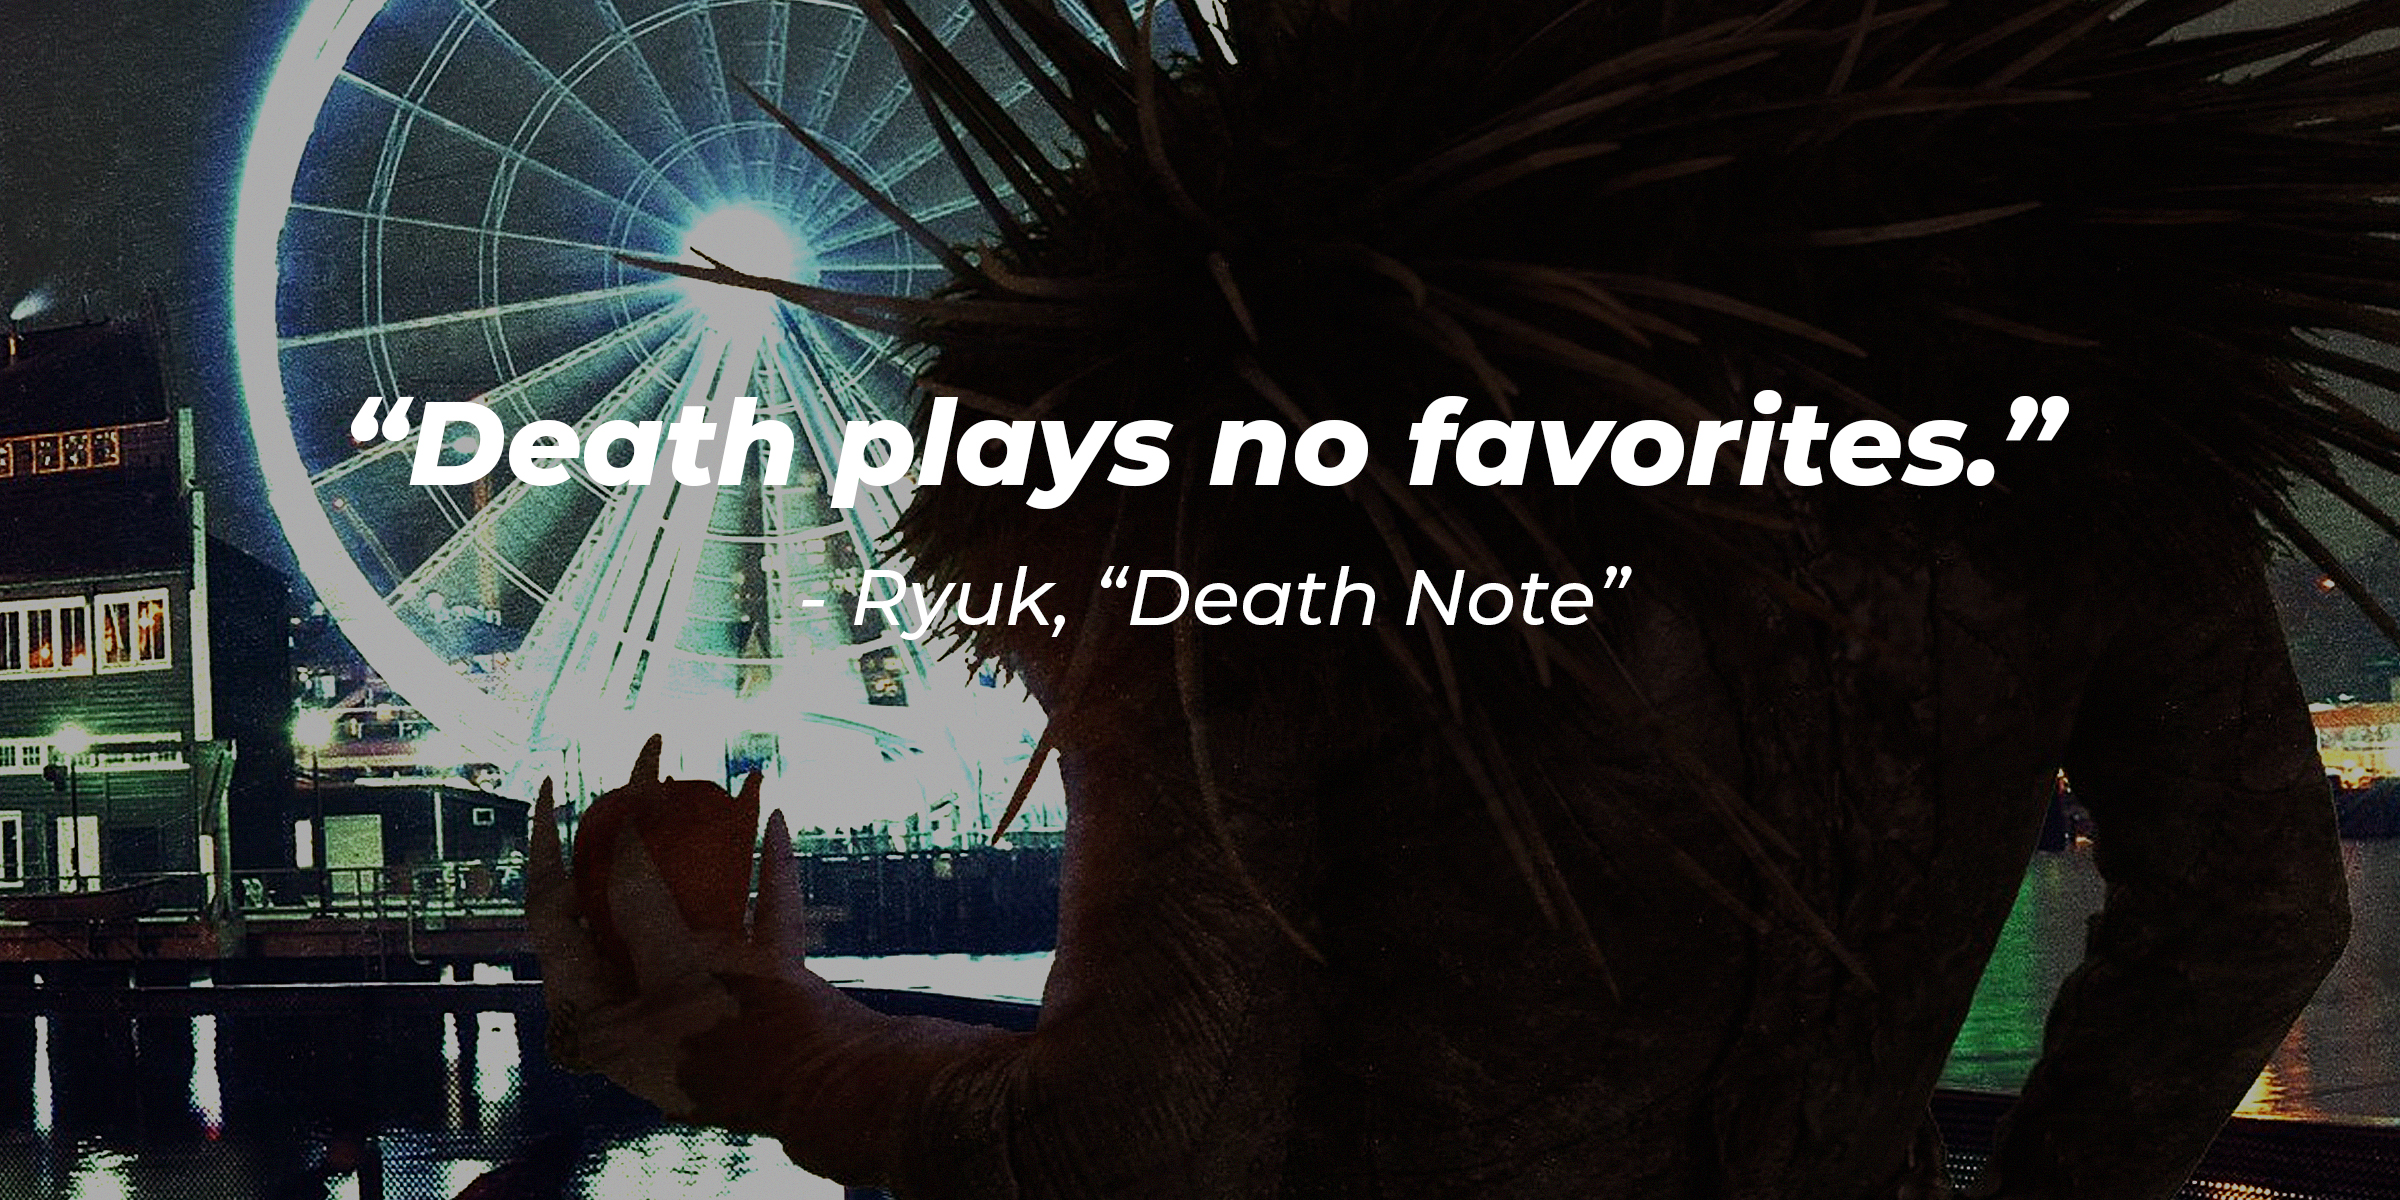 Ryuk with his quote: "Death plays no favorites." | Source: Facebook.com/deathnote